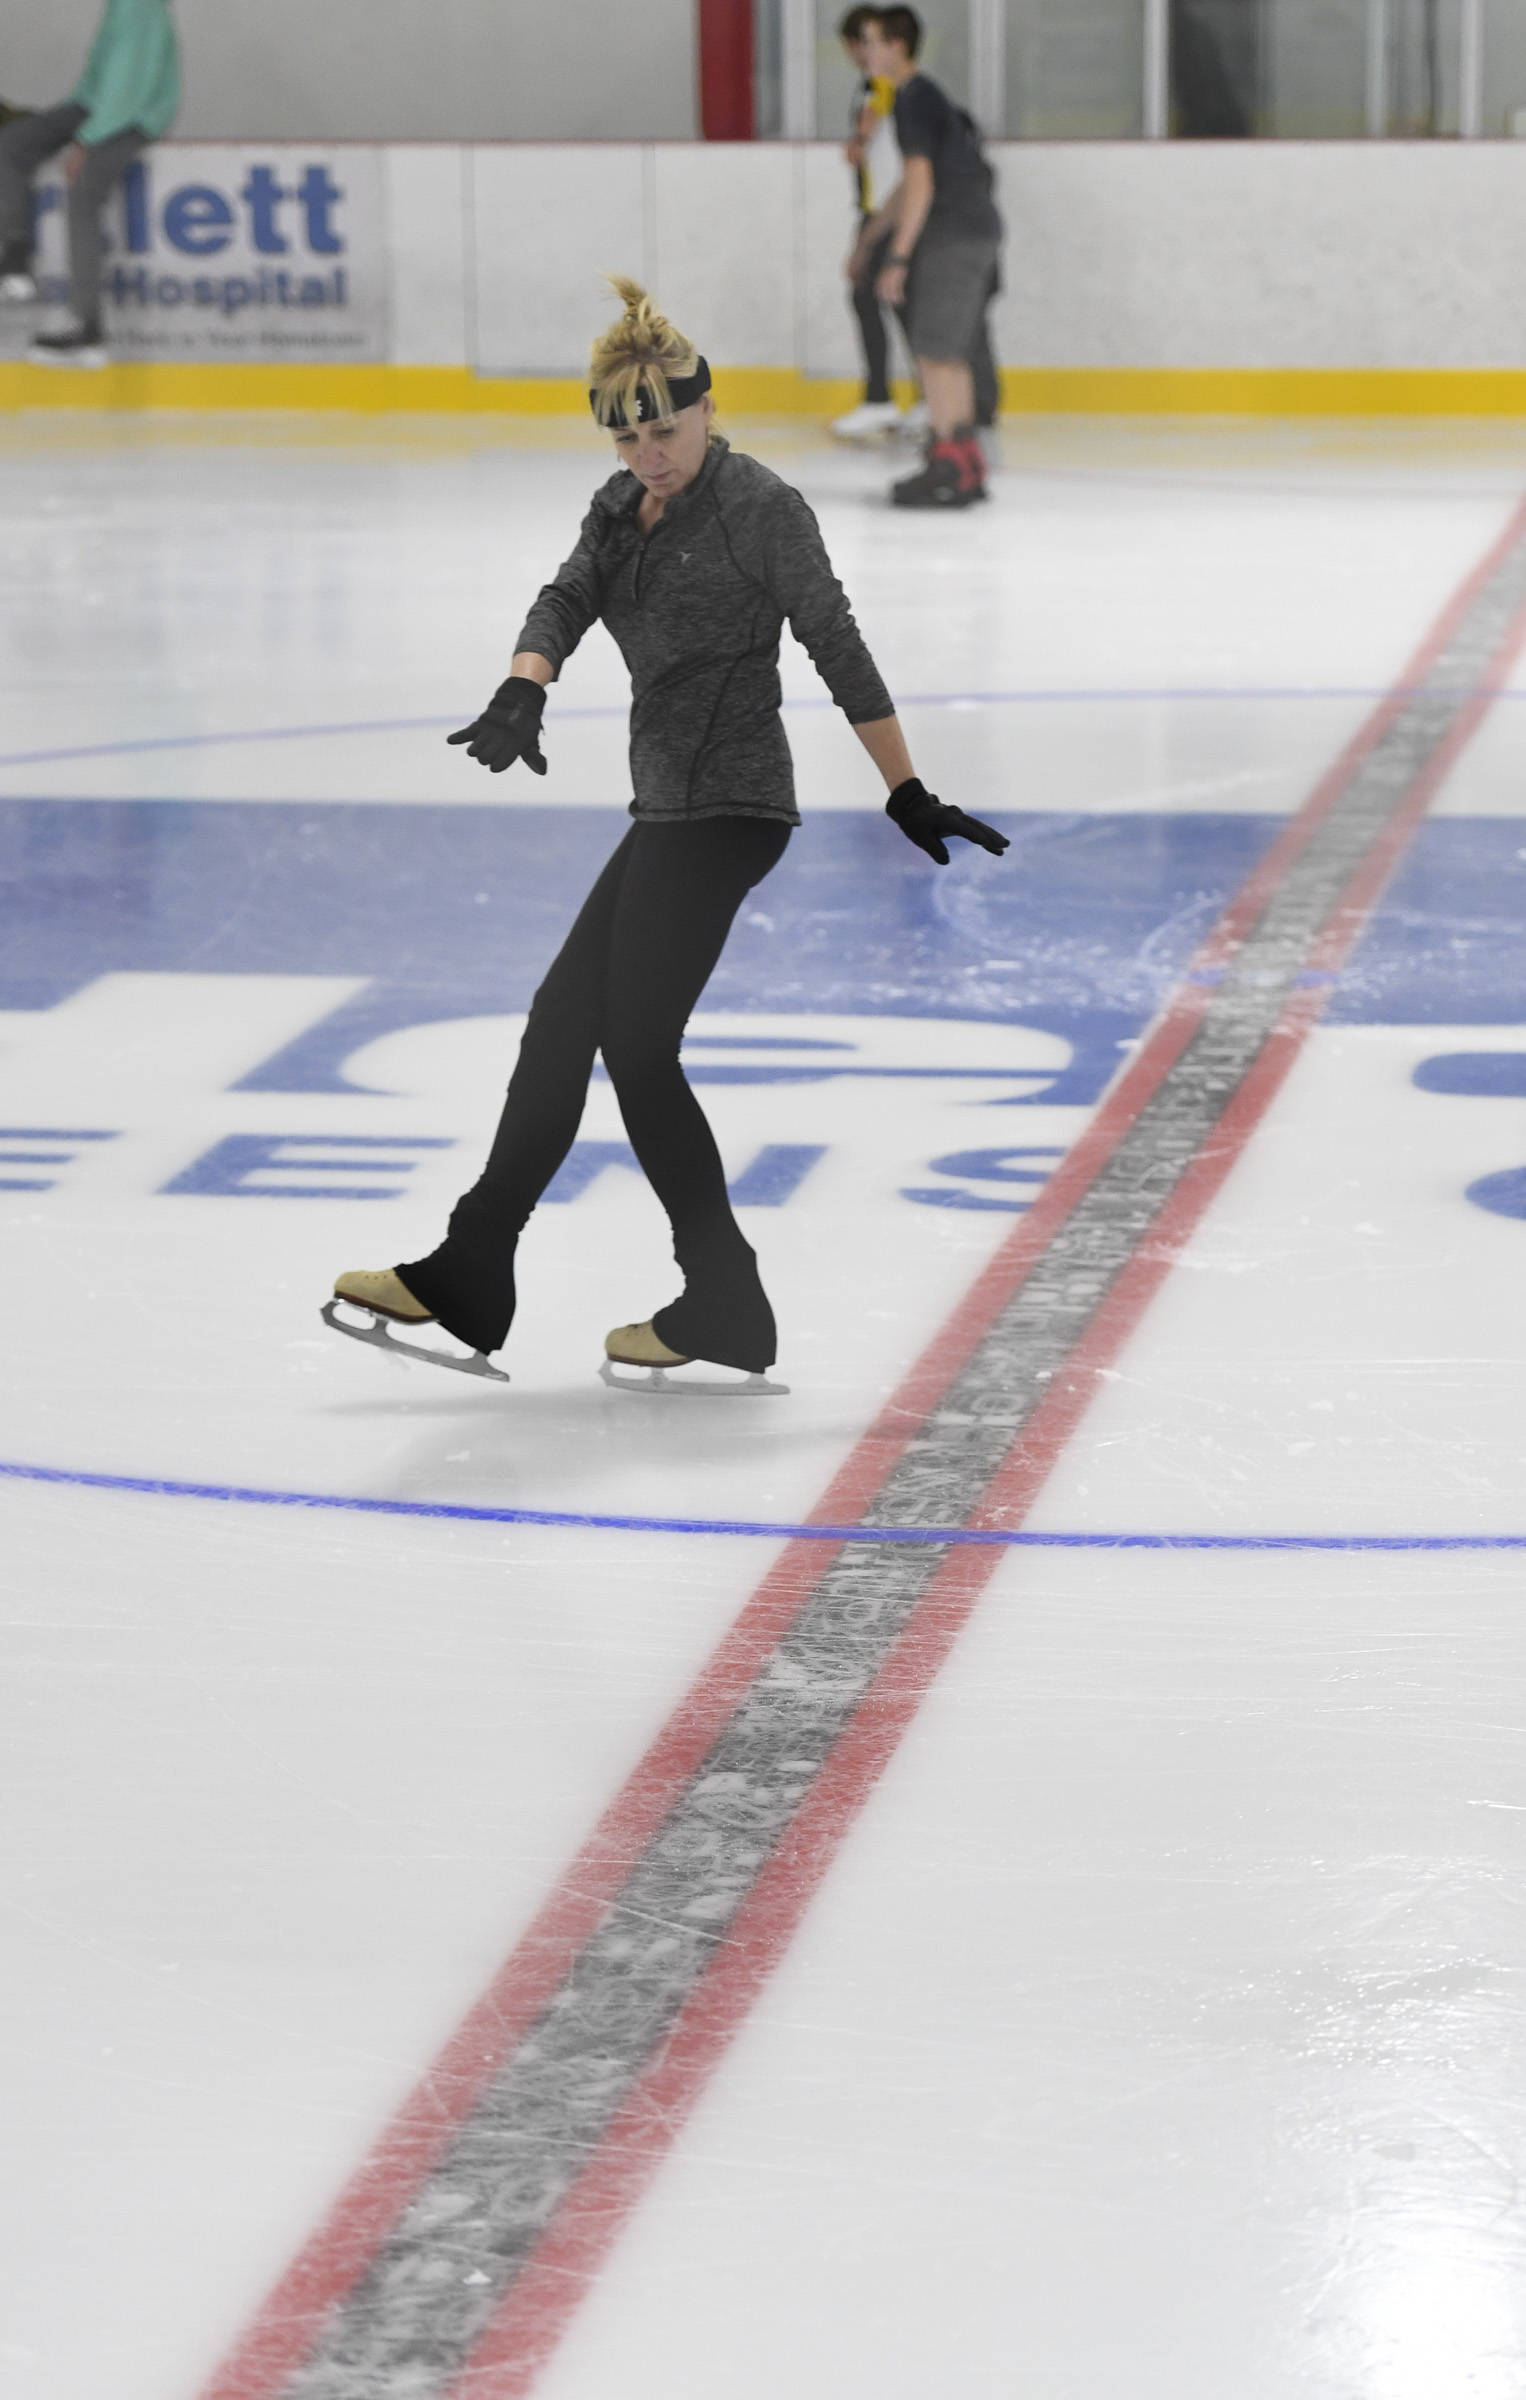 Wendy Buille practices her figure skating during a free skate on the opening day at the Treadwell Arena on Monday, Aug. 5, 2019. (Michael Penn | Juneau Empire)